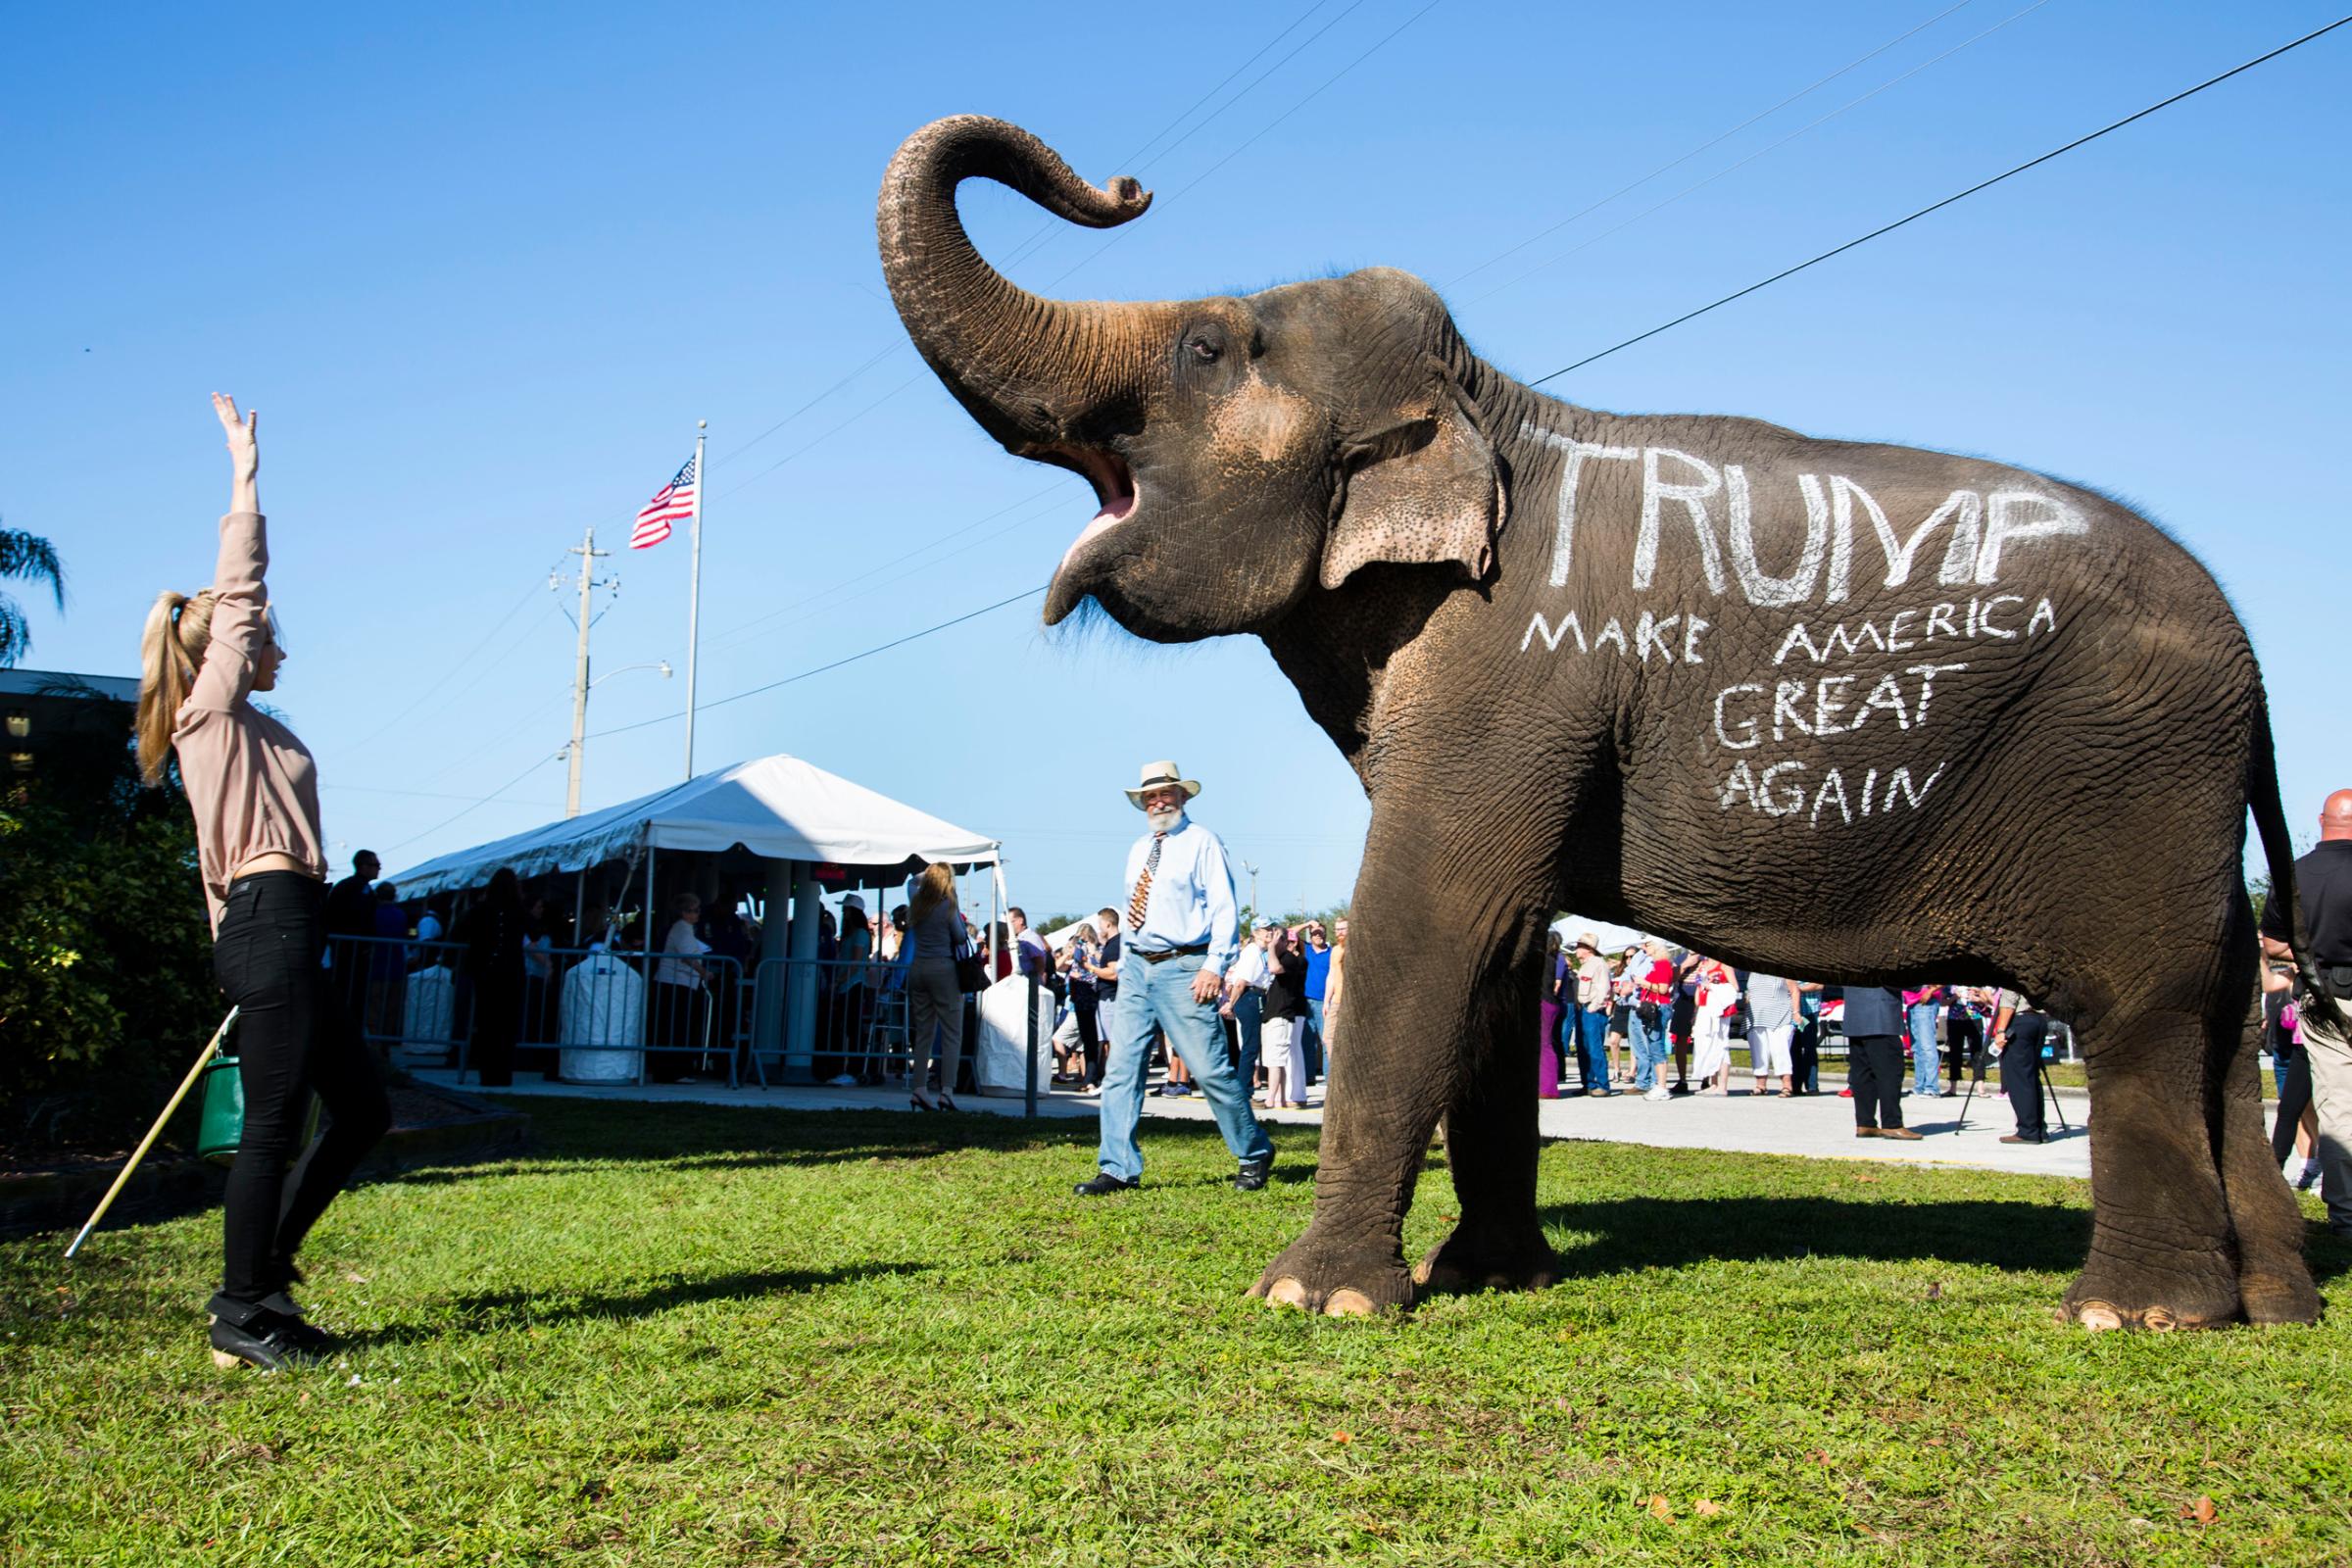 Donald Trump supporters parade an elephant in front of a rally in Sarasota, Fla. Nov. 28, 2015.